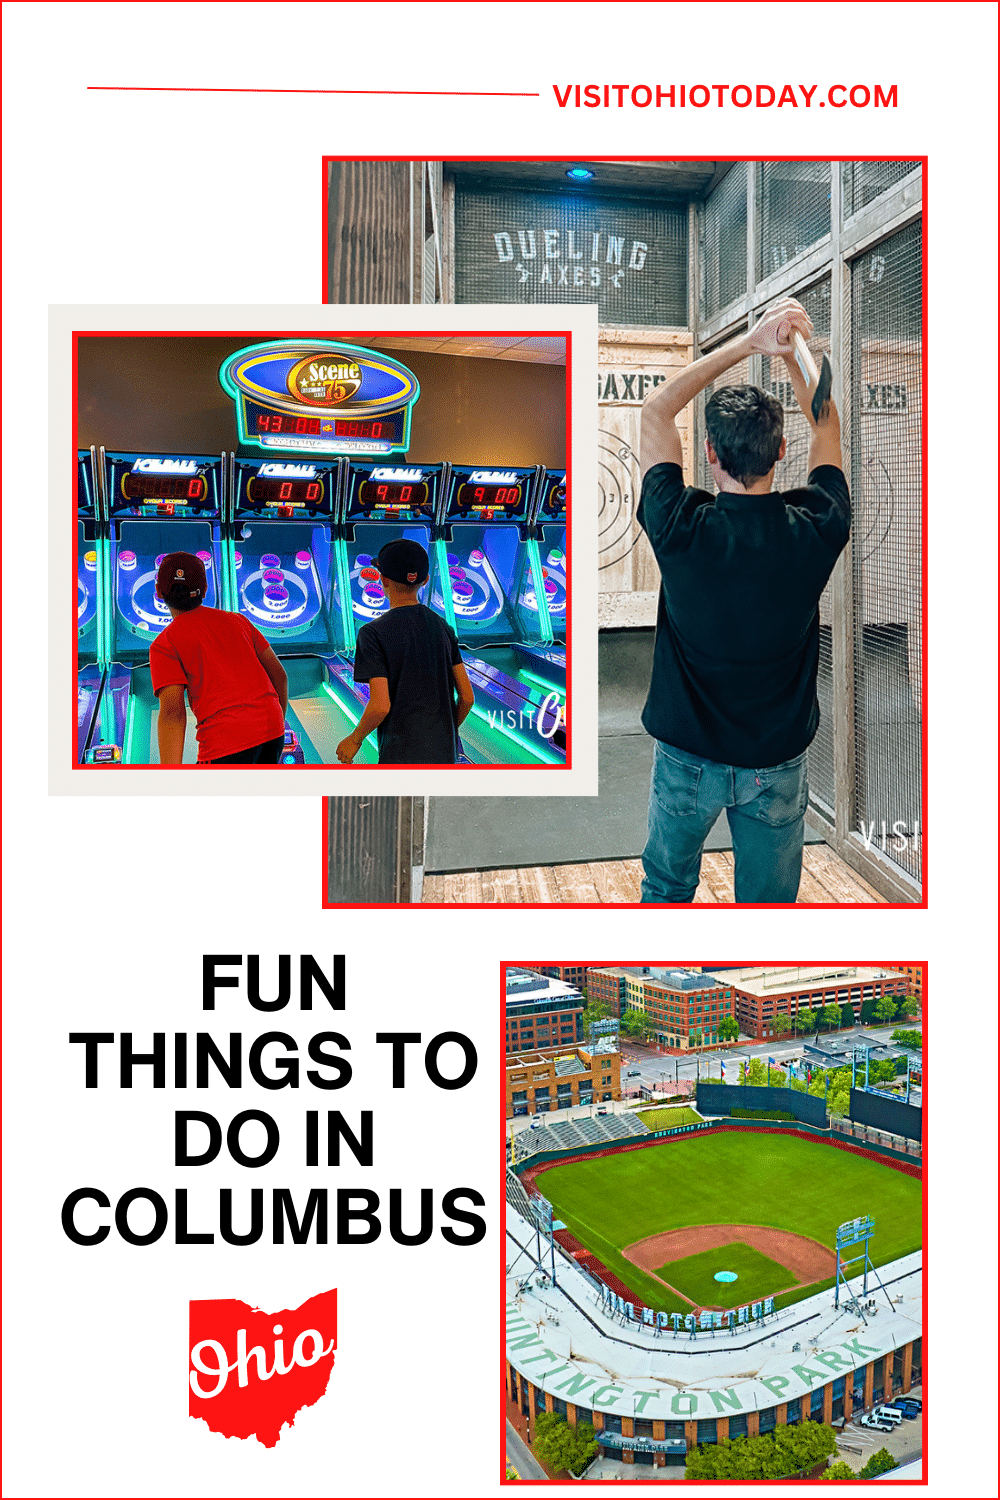 As the capital city of Ohio, Columbus has a vast variety of things to do for everyone to enjoy. We have gathered a list of 30 great fun things to do in Columbus for families and some strictly for adults only.